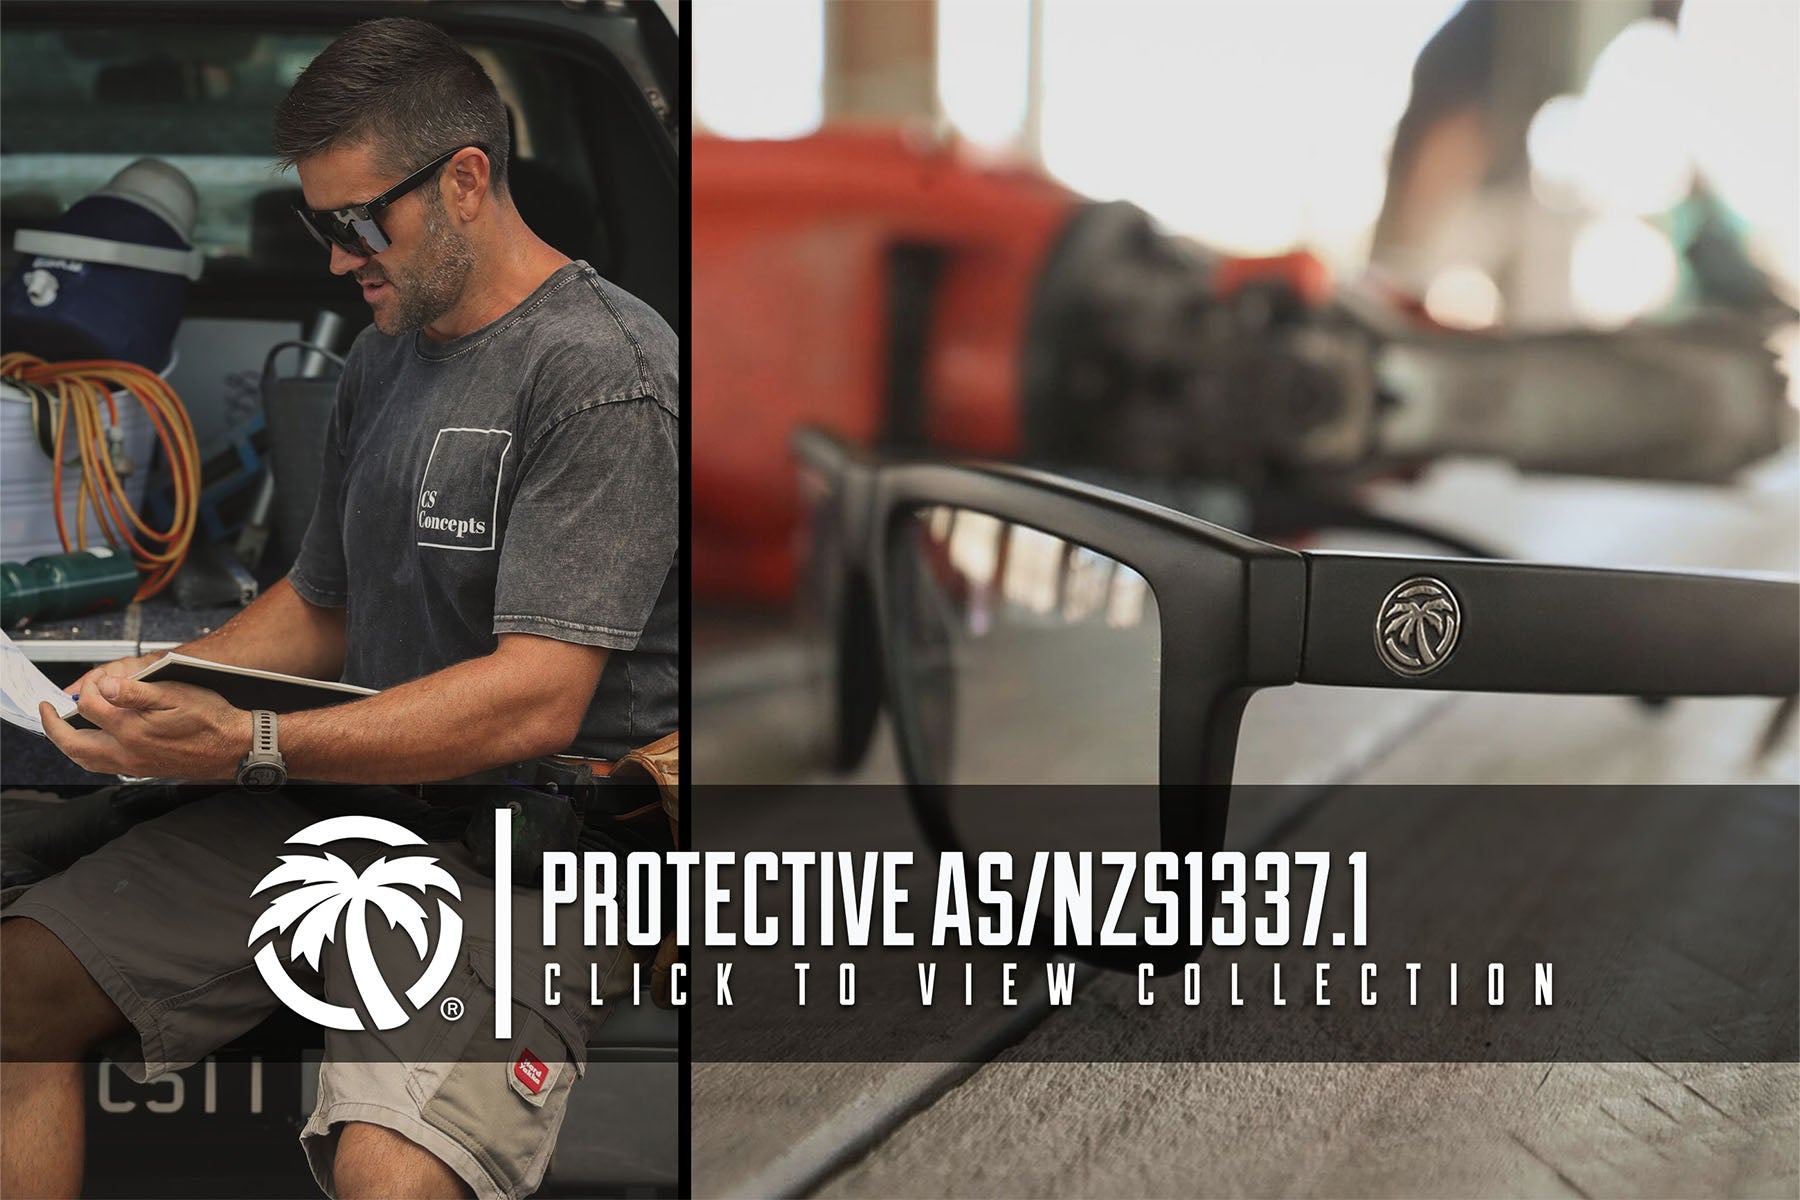 Heat Wave Visual Australia. Shop Protective Safety Glasses AS/NZS1337.1 Approved. Ultimate Style Performance and Protection Like No other. Free Same Day Shipping